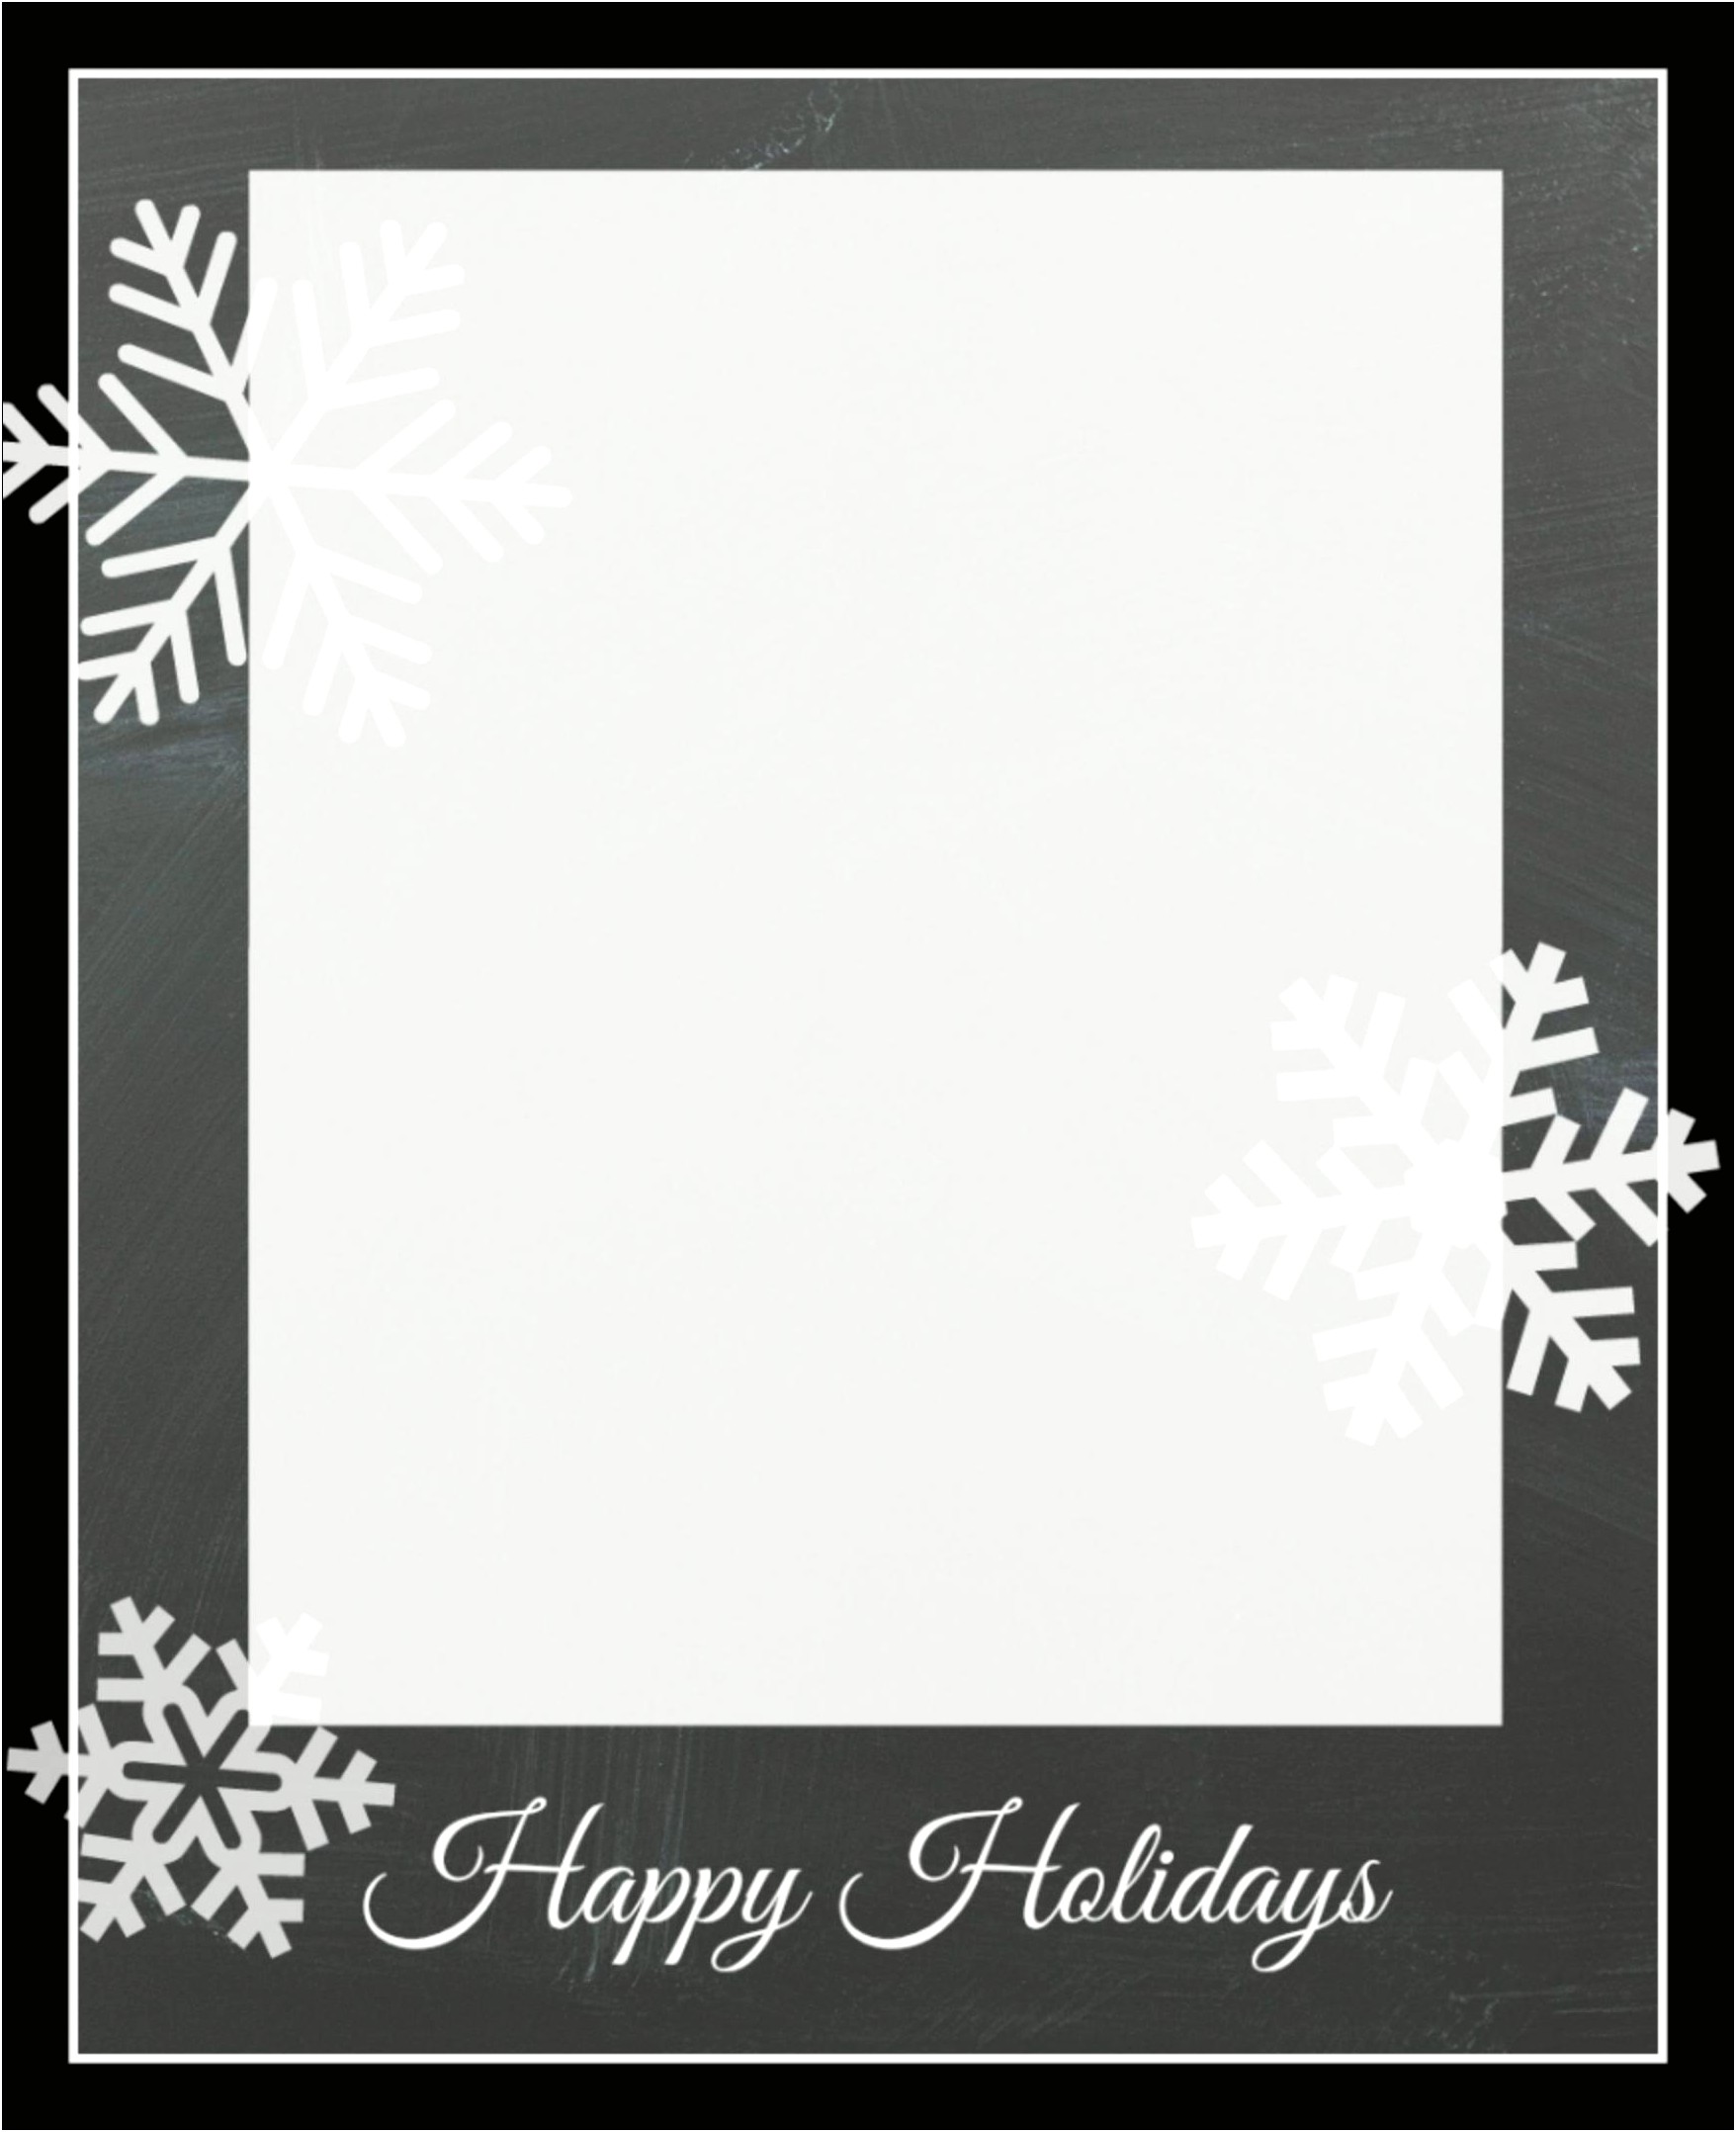 Free Downloadable Holiday Photo Card Templates